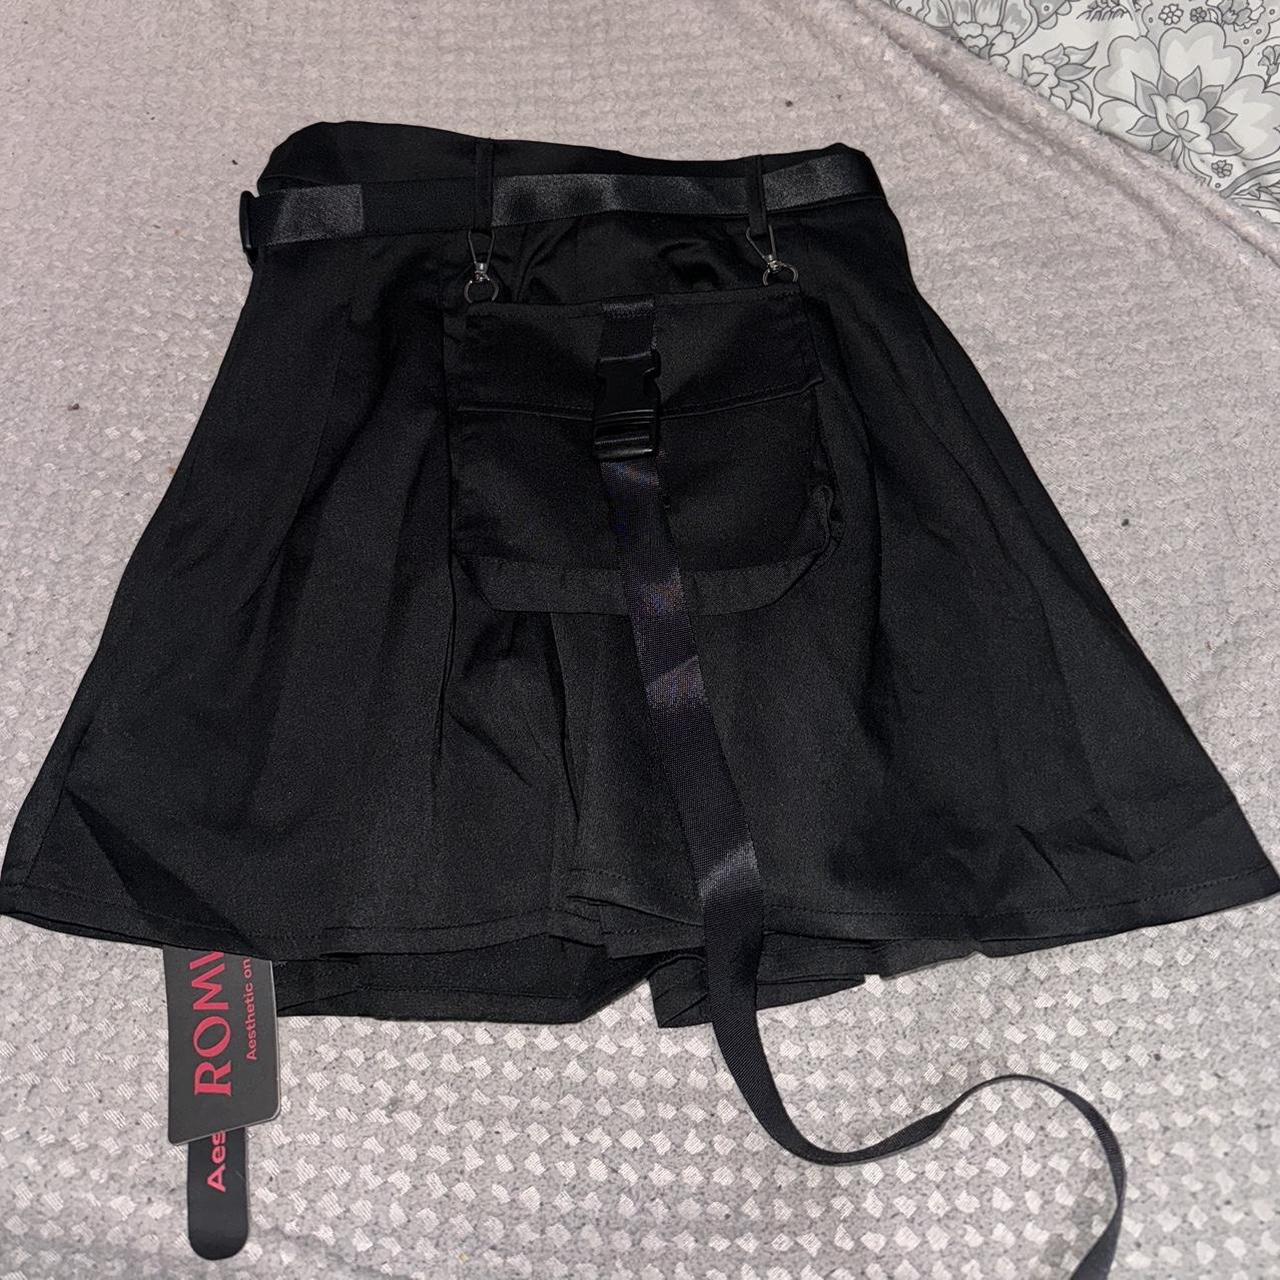 black pleated cargo skirt 🖤 brand new with tags 🏷️... - Depop